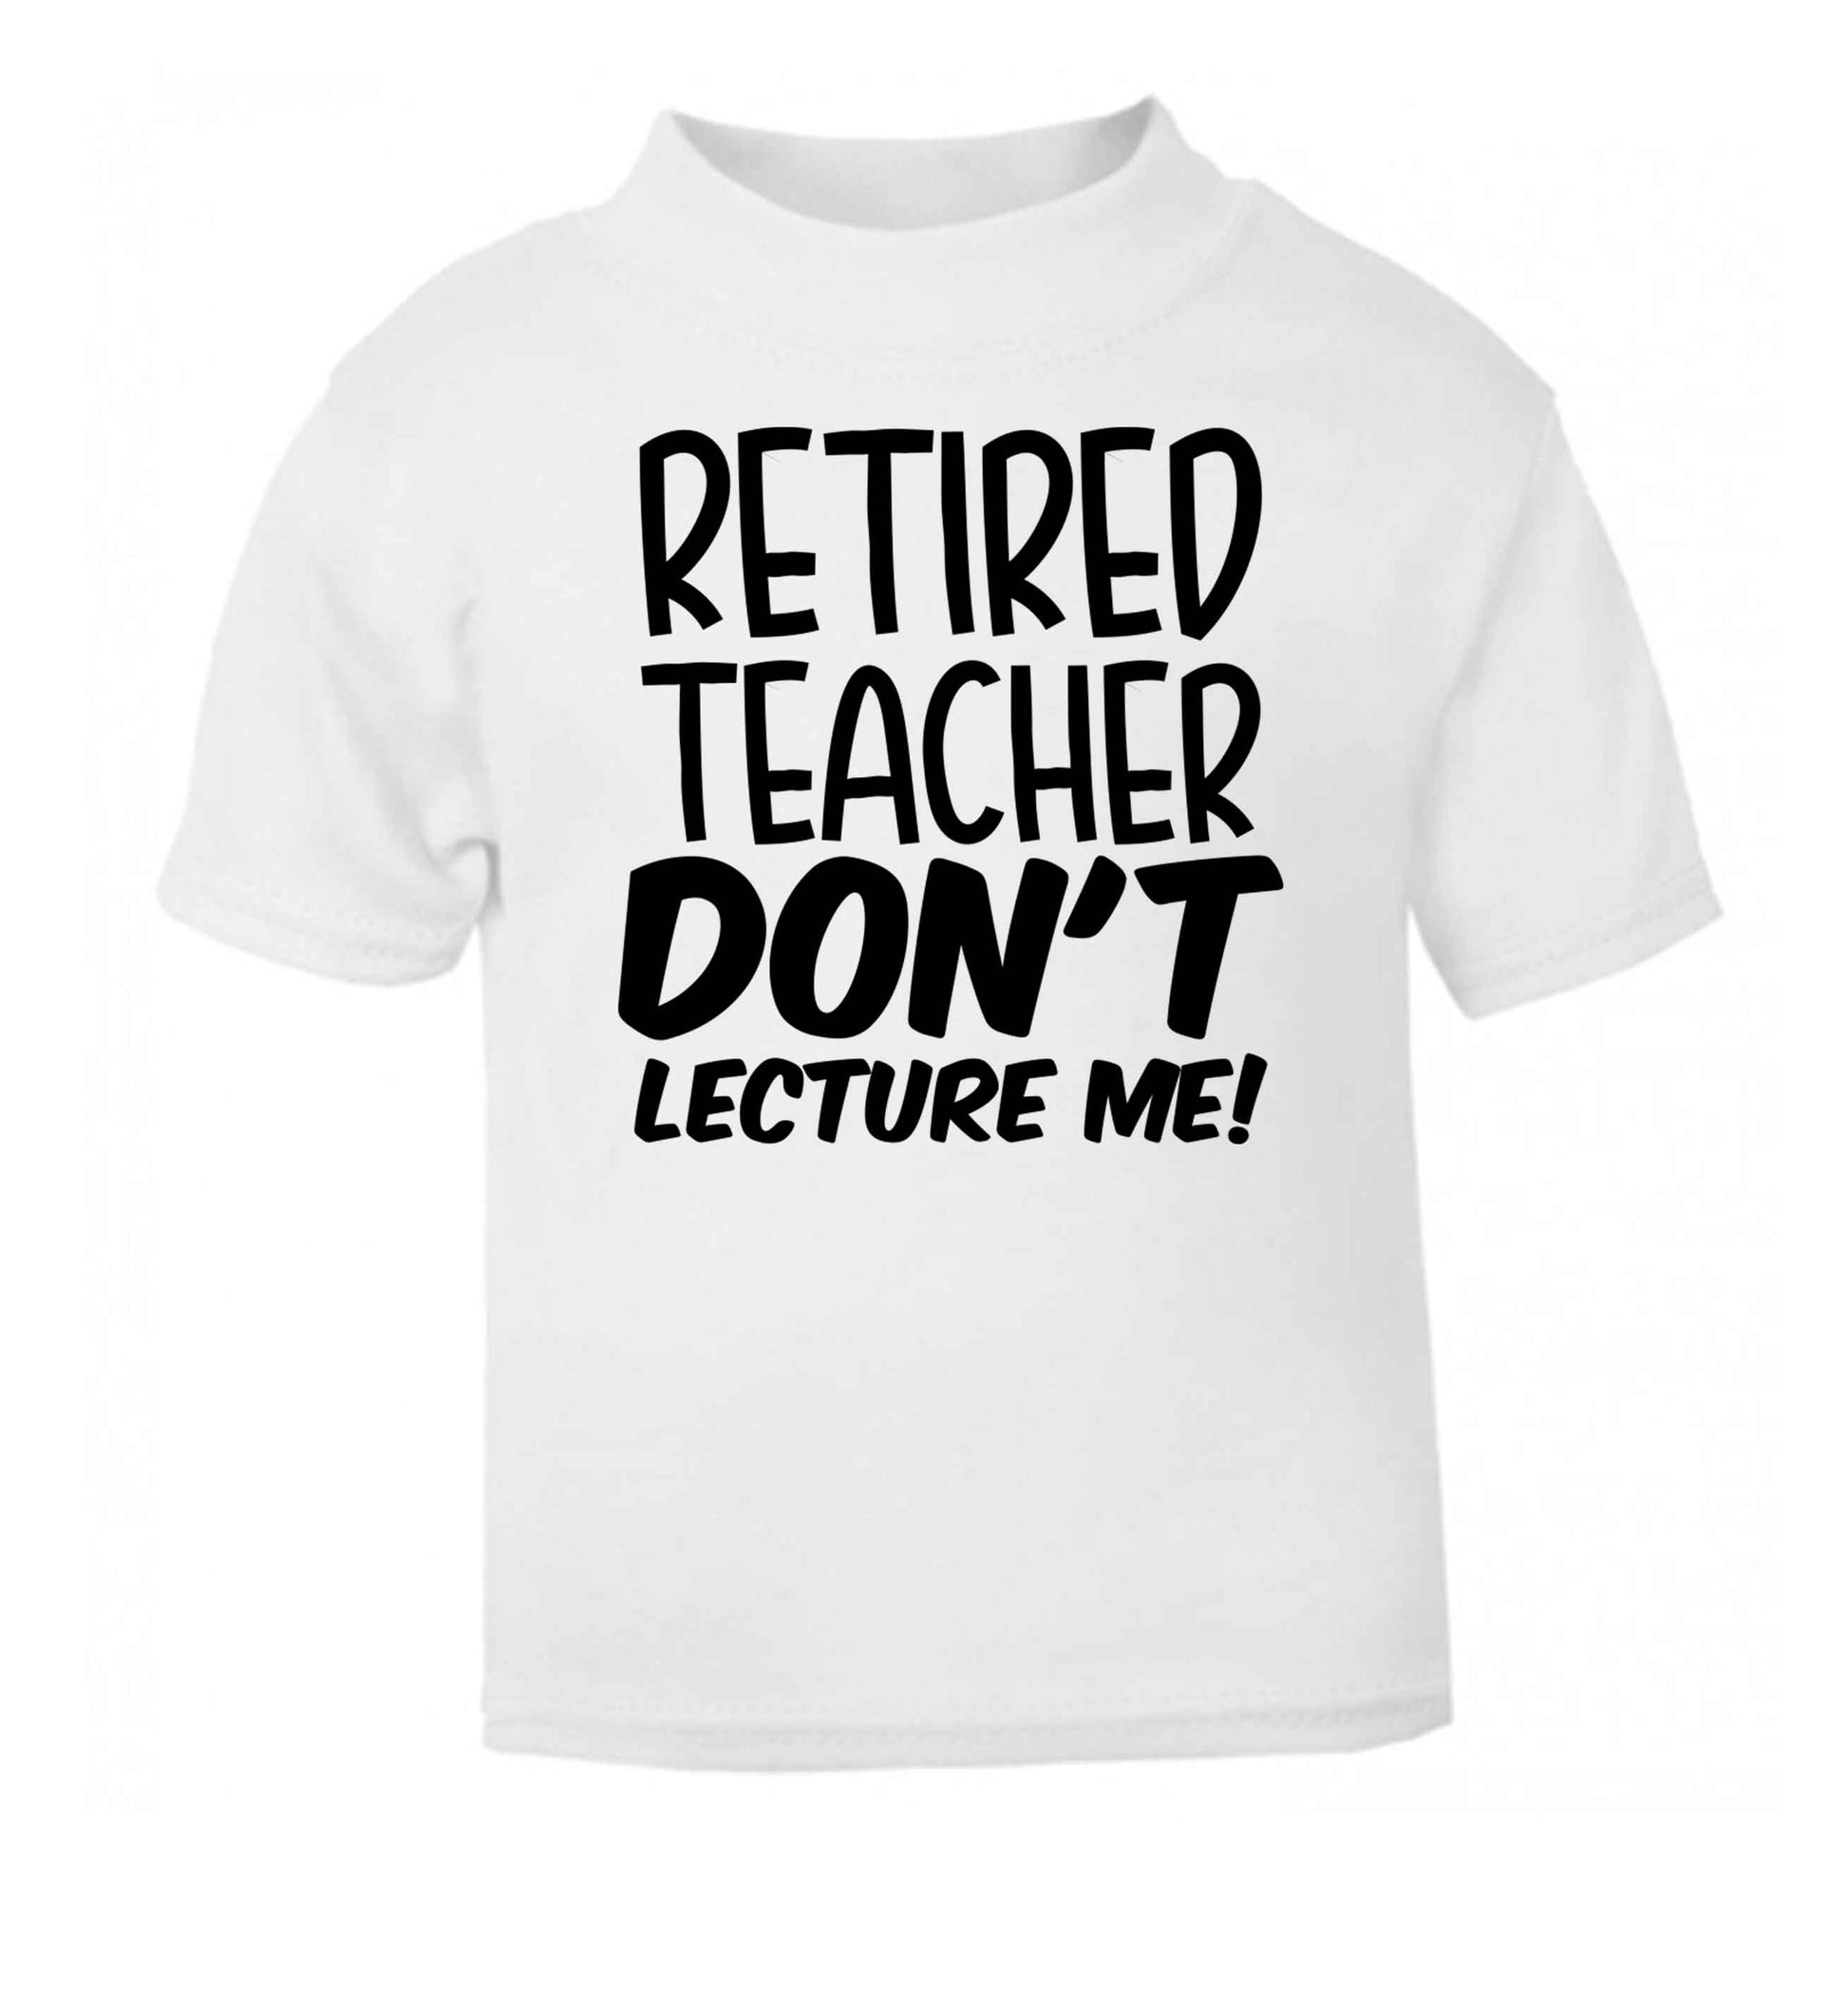 Retired teacher don't lecture me! white Baby Toddler Tshirt 2 Years